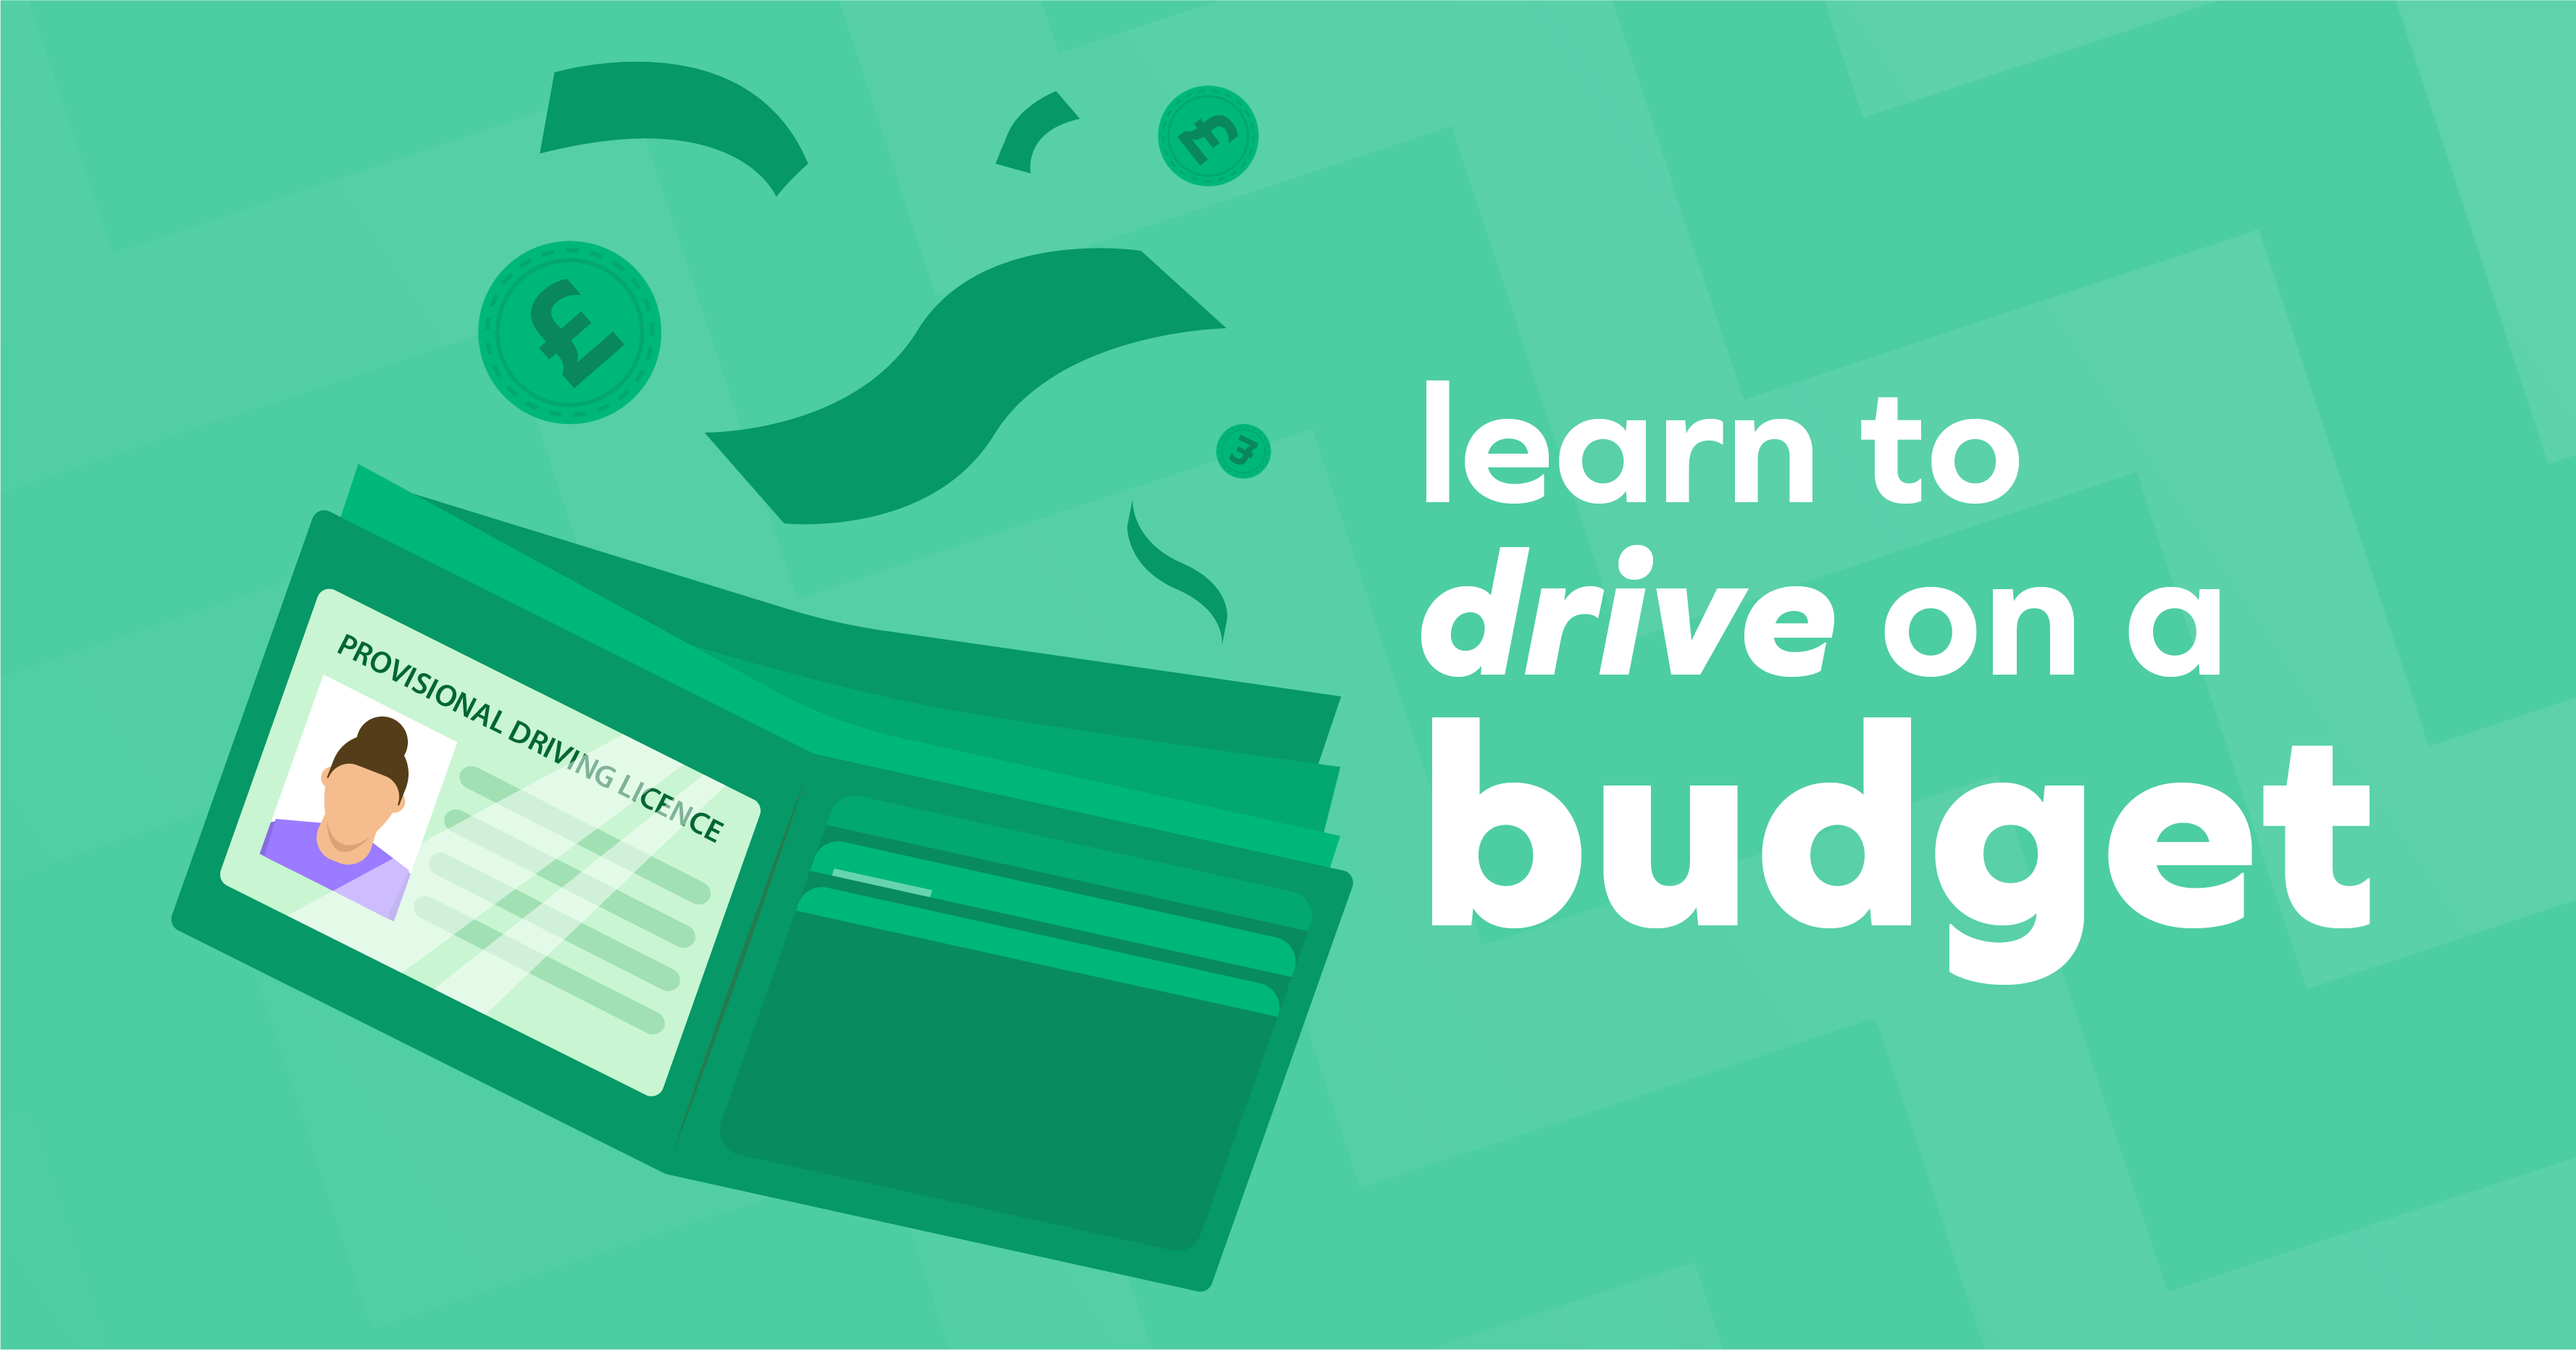 Learn to drive on a budget